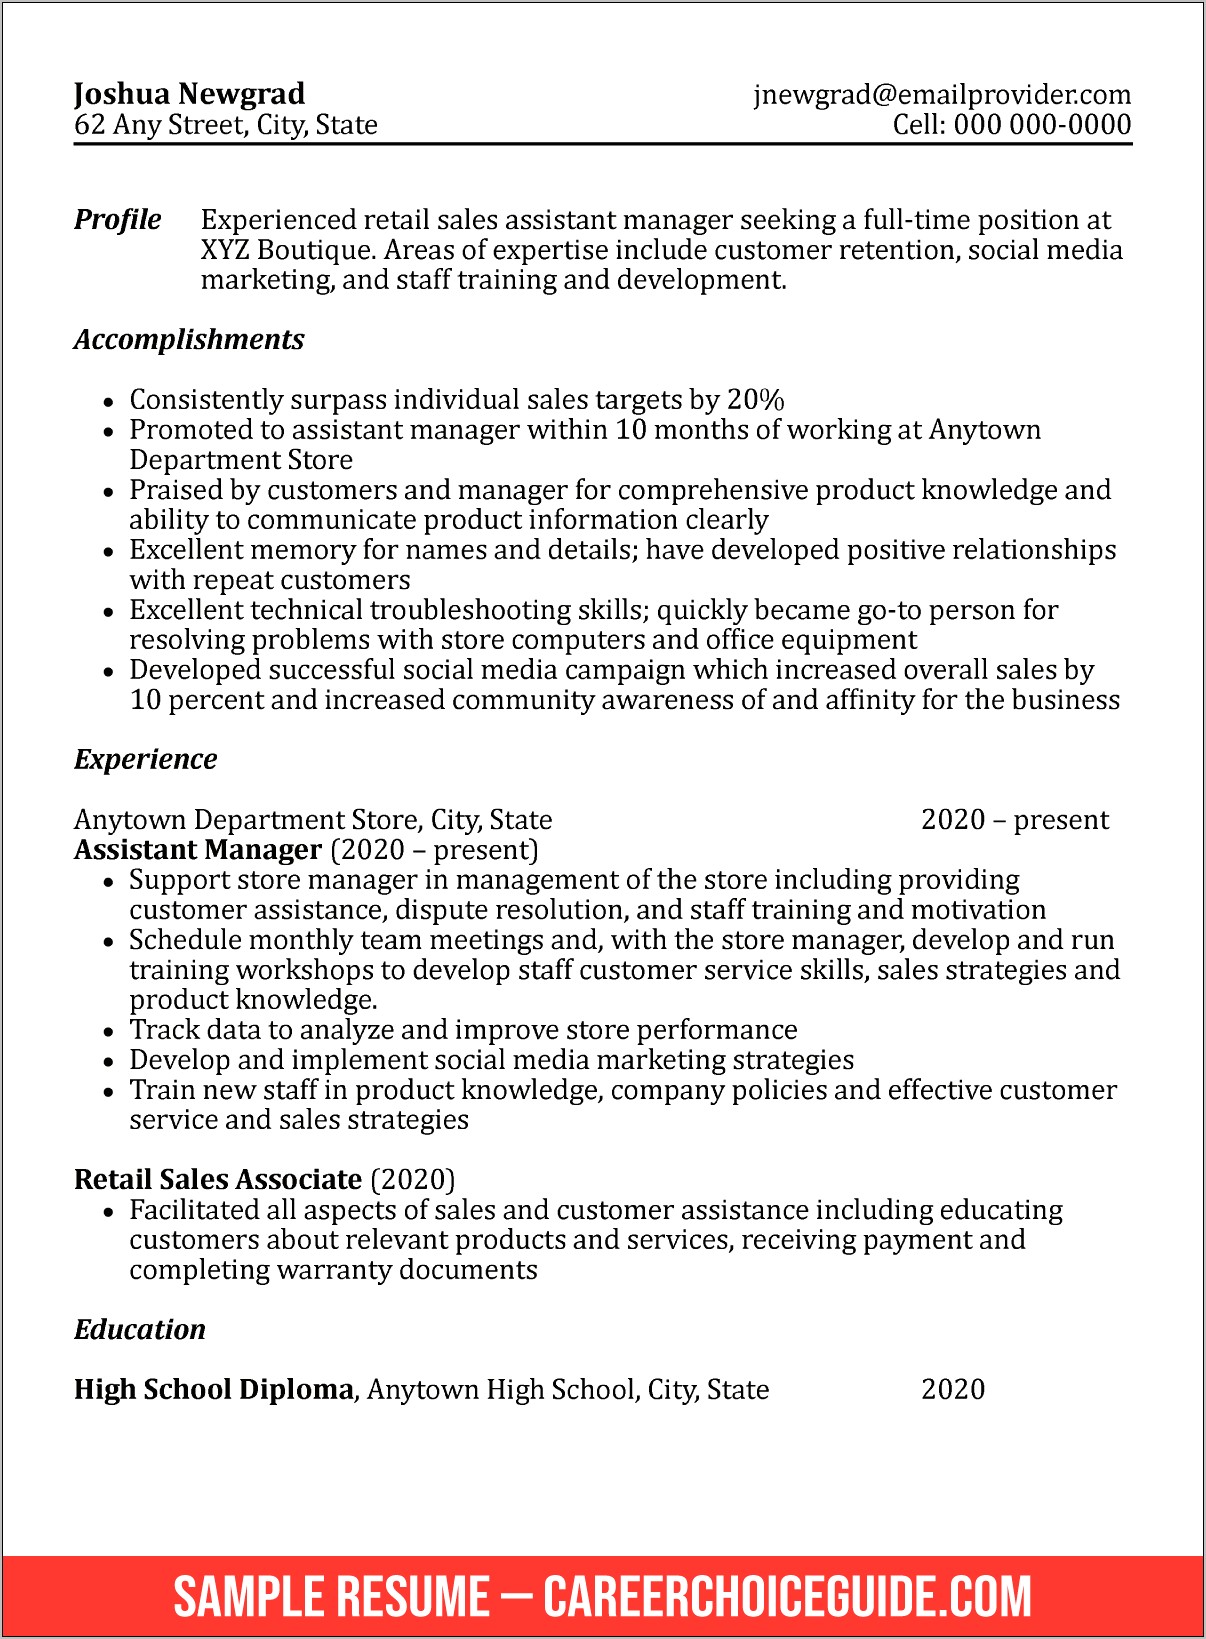 Resume Form For High School Graducate